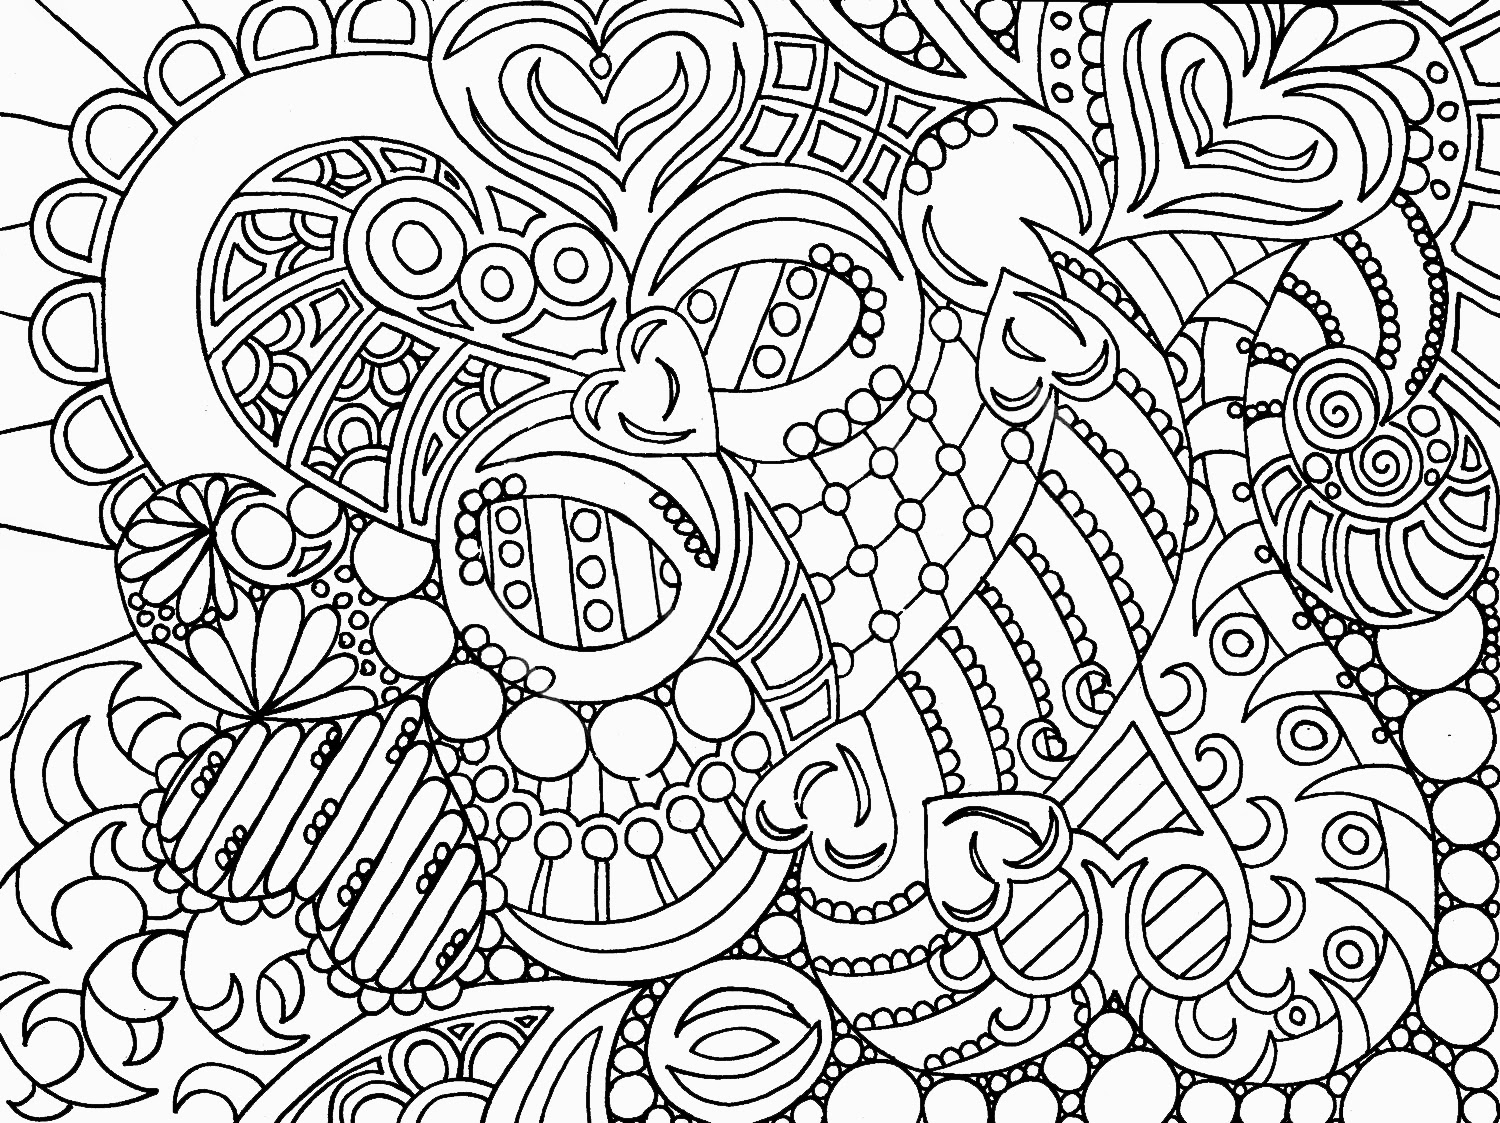 Free Creative coloring pages to print for kids Download print and color